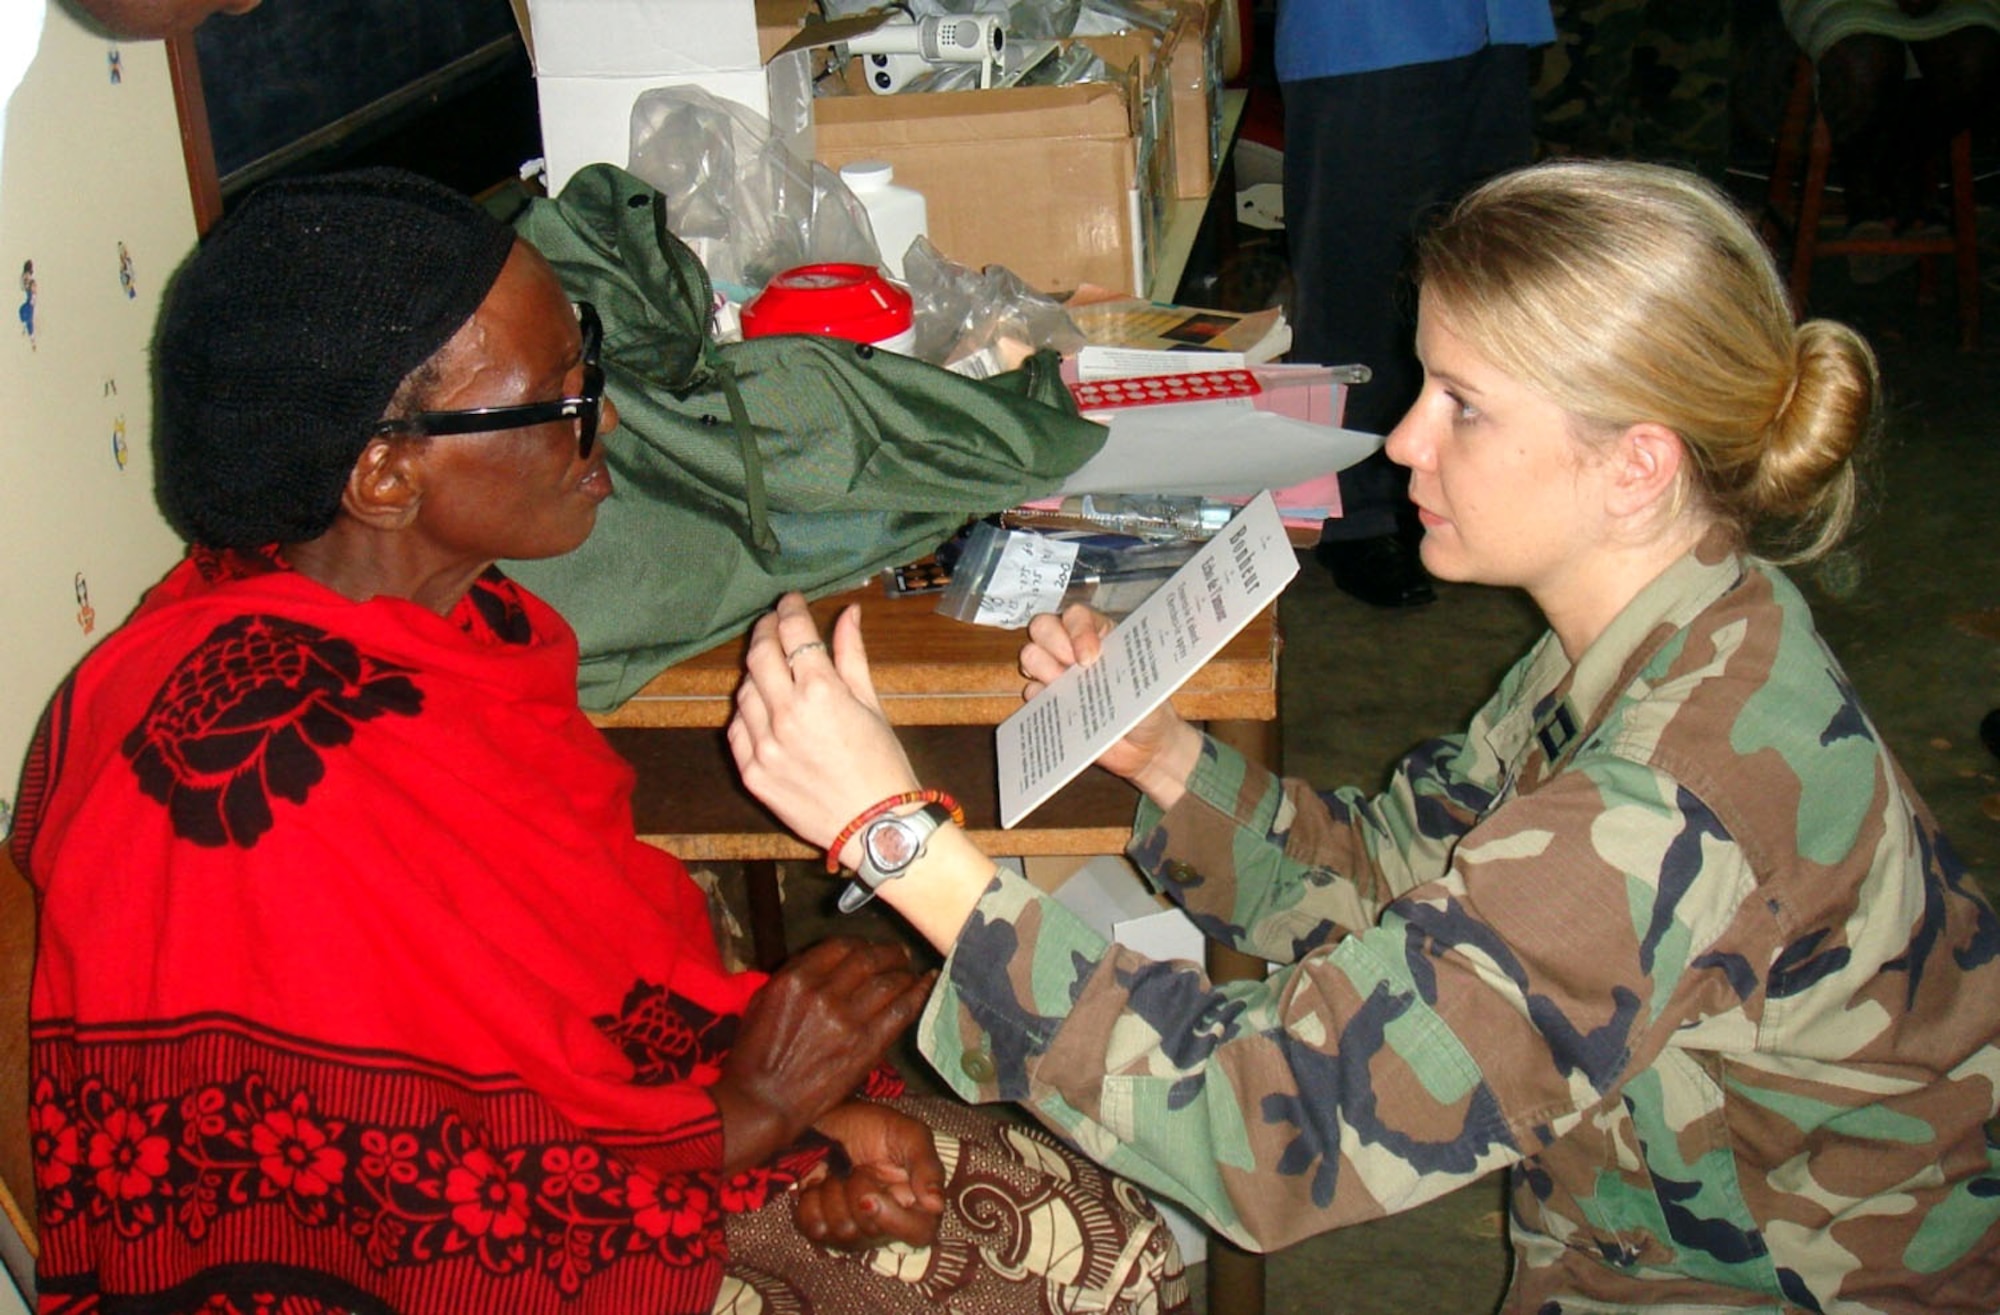 Capt. Christie Barton examines a Rwandan woman during a medical capabilities mission that five medics from around the U.S. European Command participated in recently. The group from Aviano Air Base, Italy, and Ramstein AB, Germany, performed eye and dental exams for nearly 1,500 people, and in conjunction with the Rwandan Military Defense Force and the International Red Cross, they held medical seminars for 50 local doctors as part of the two-week military-to-military operation. Captain Barton is an optometrist from the 435th Medical Group at Ramstein AB. (U.S. Air Force photo/Staff Sgt. Chad Padgett) 
